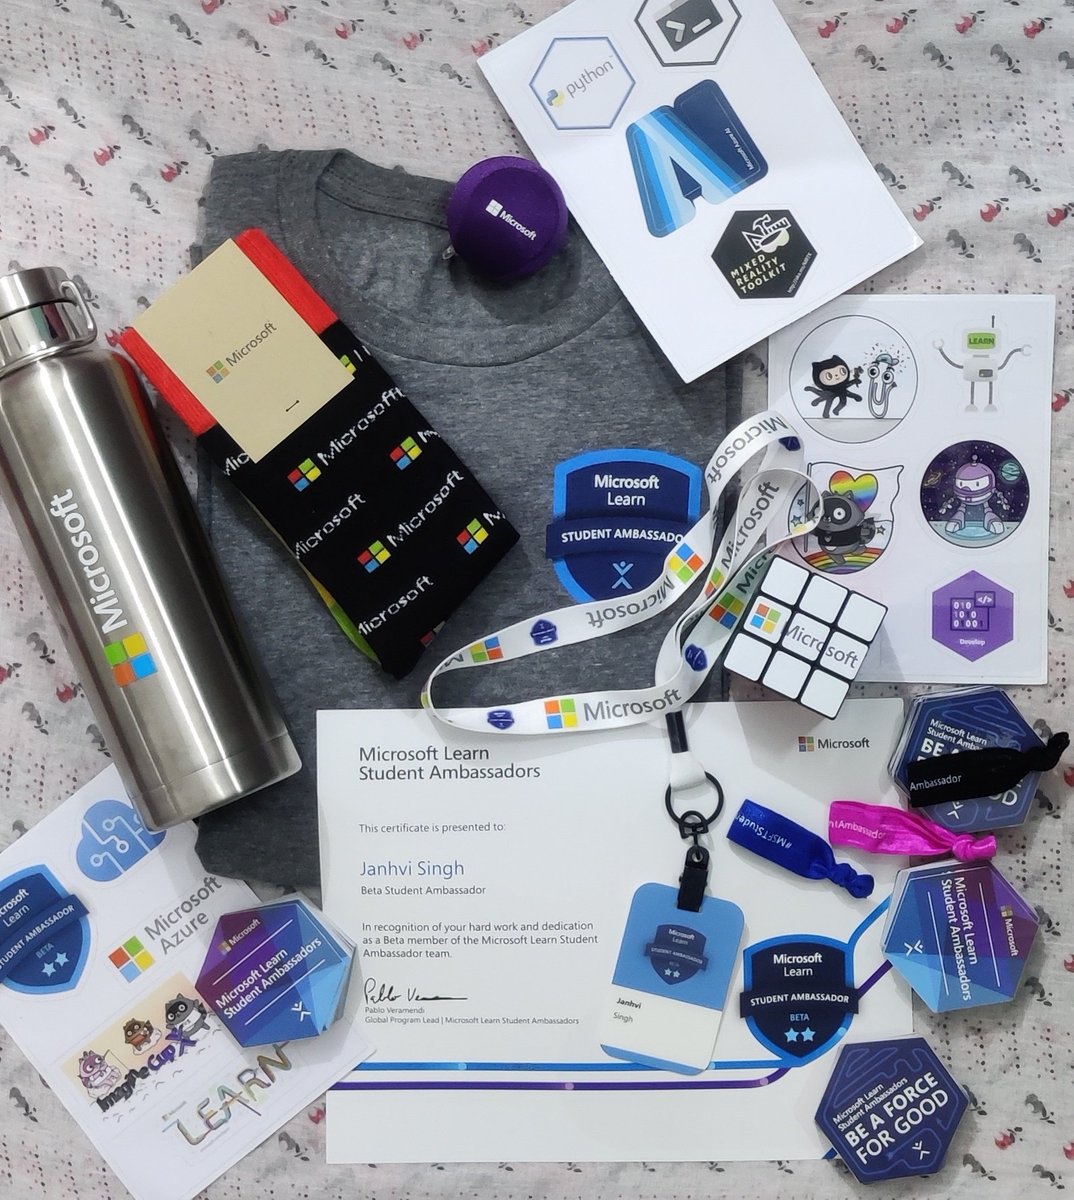 Hello everyone!!
I am glad to share that I finally received my Beta Microsoft Learn Student Ambassadors Swag Kit.
Grateful to be a part of this amazing community of tech enthusiasts ✨
#studentambassadors #BetaSwag #microsoftlearnstudentambassador #swagkit #microsoft